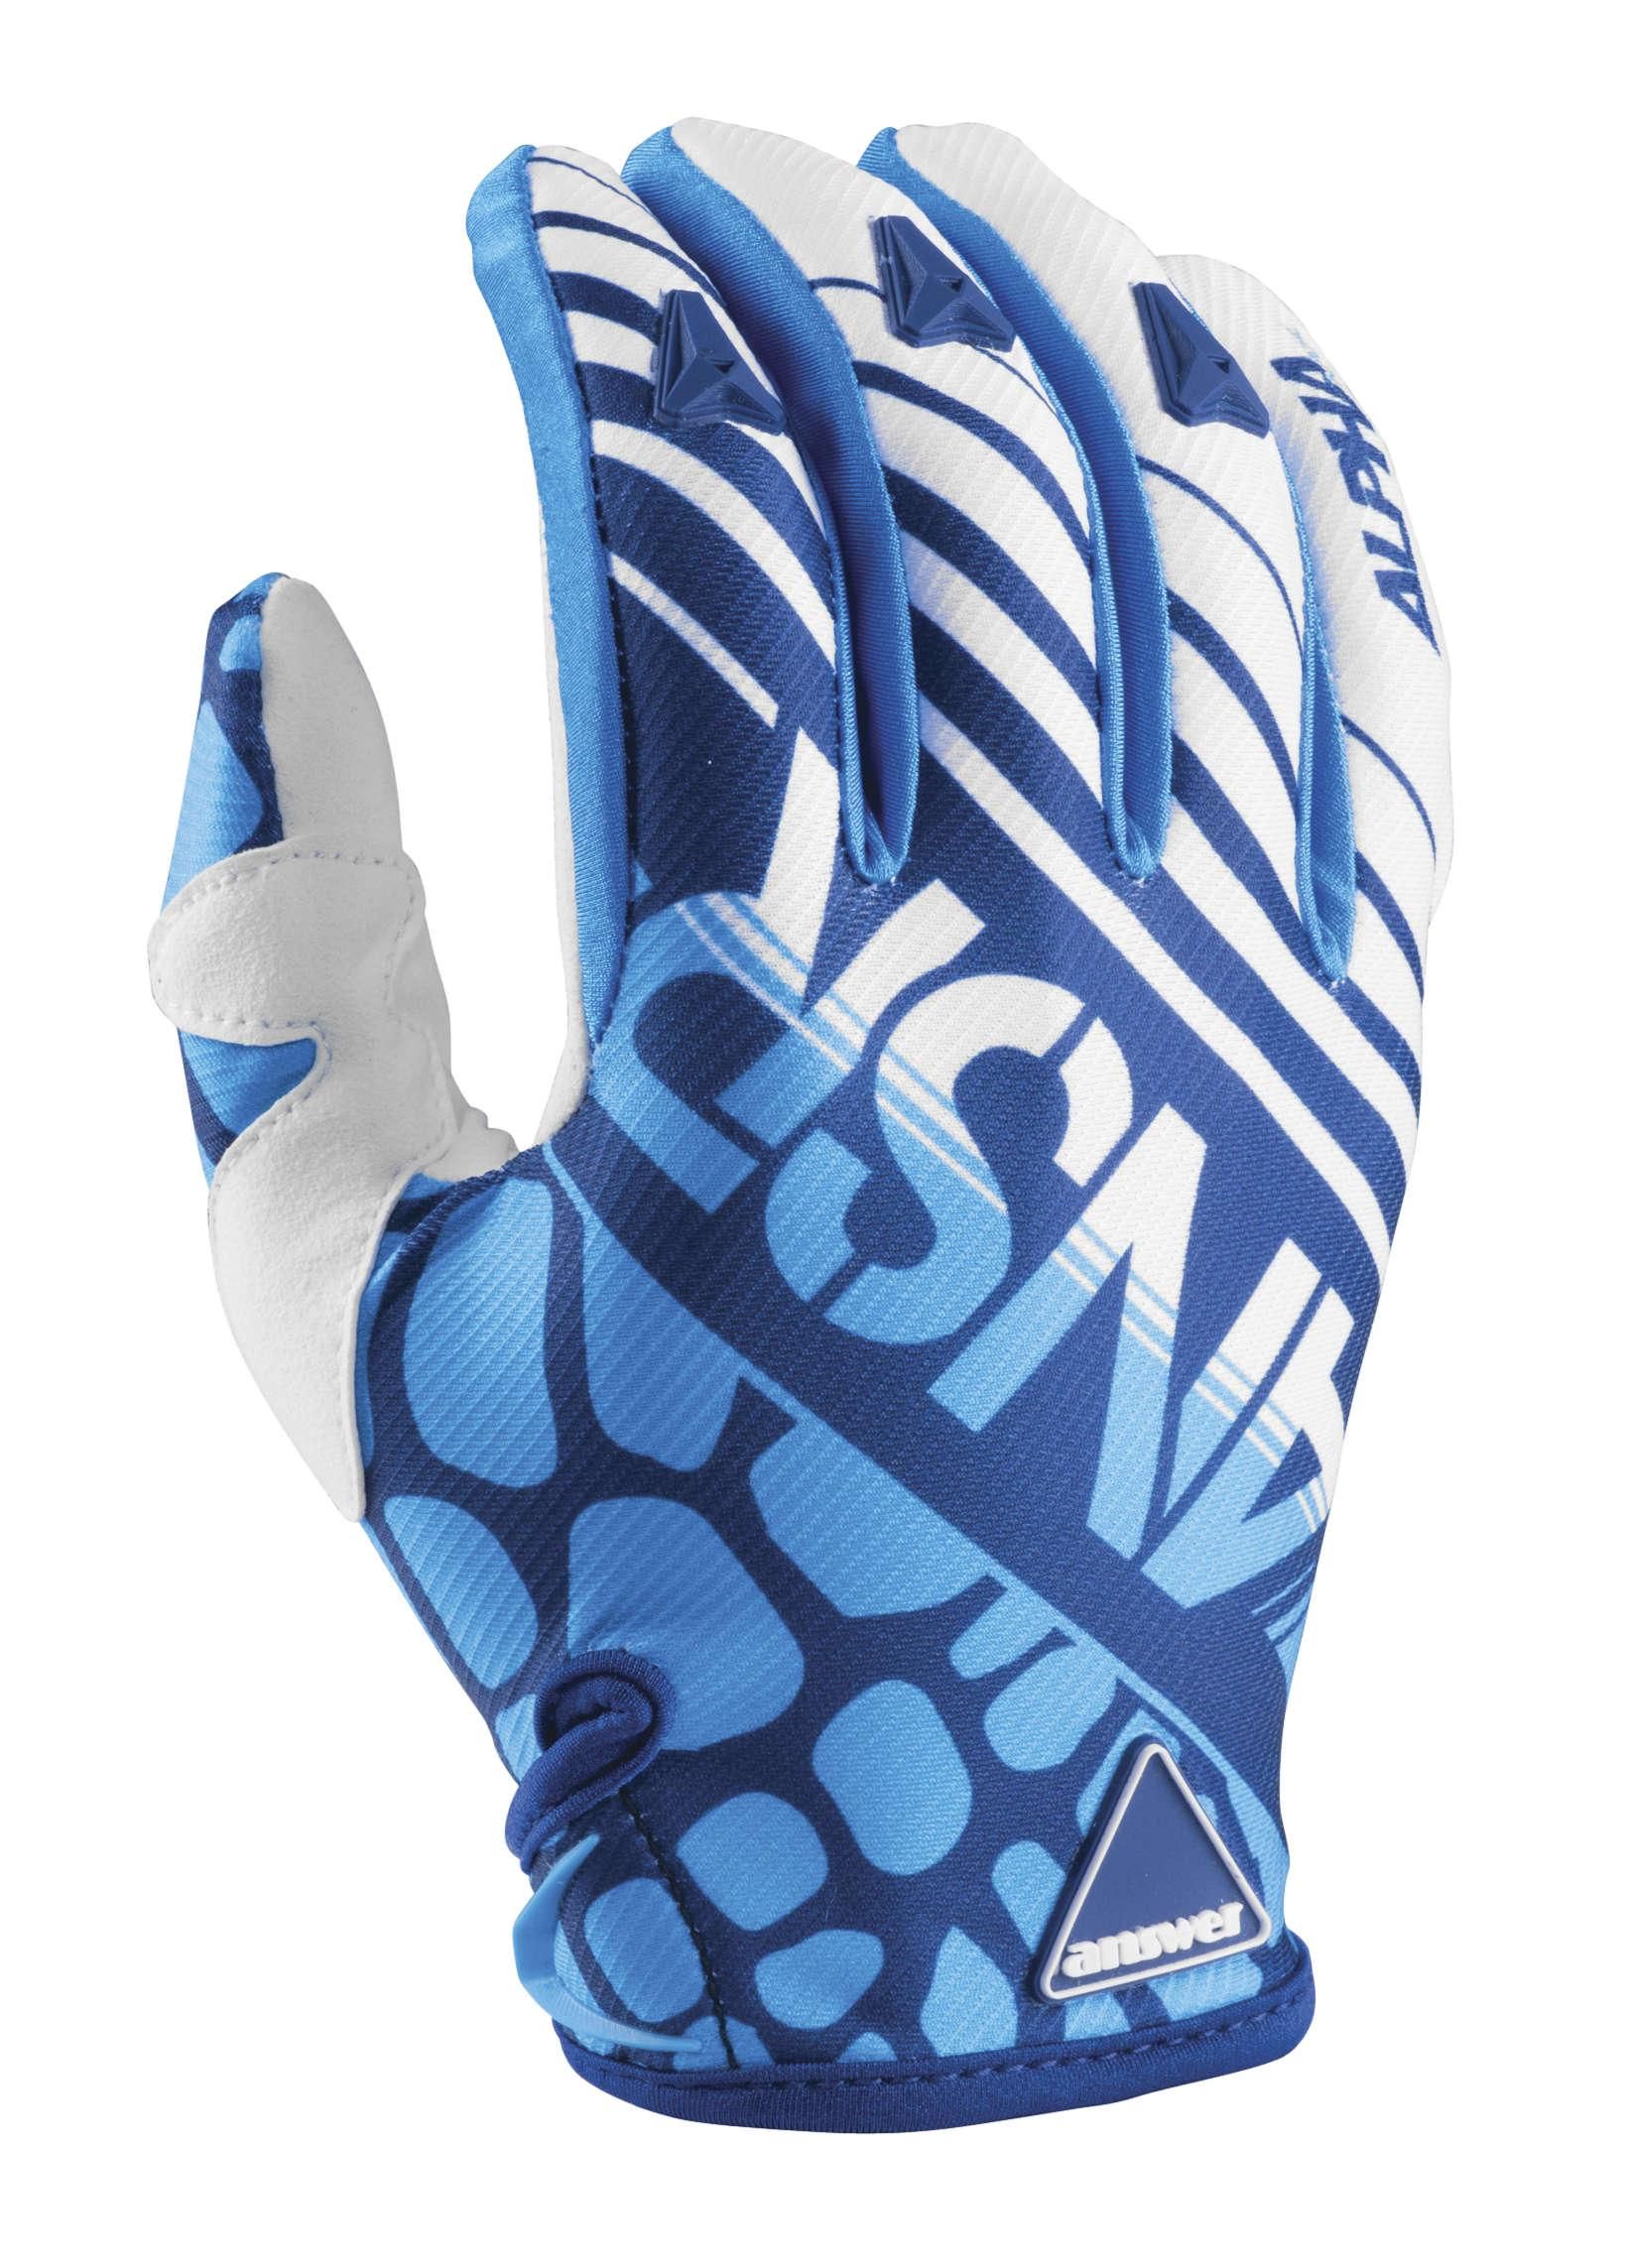 4EER-ANSWER-471414 Alpha Limited Edition Gloves